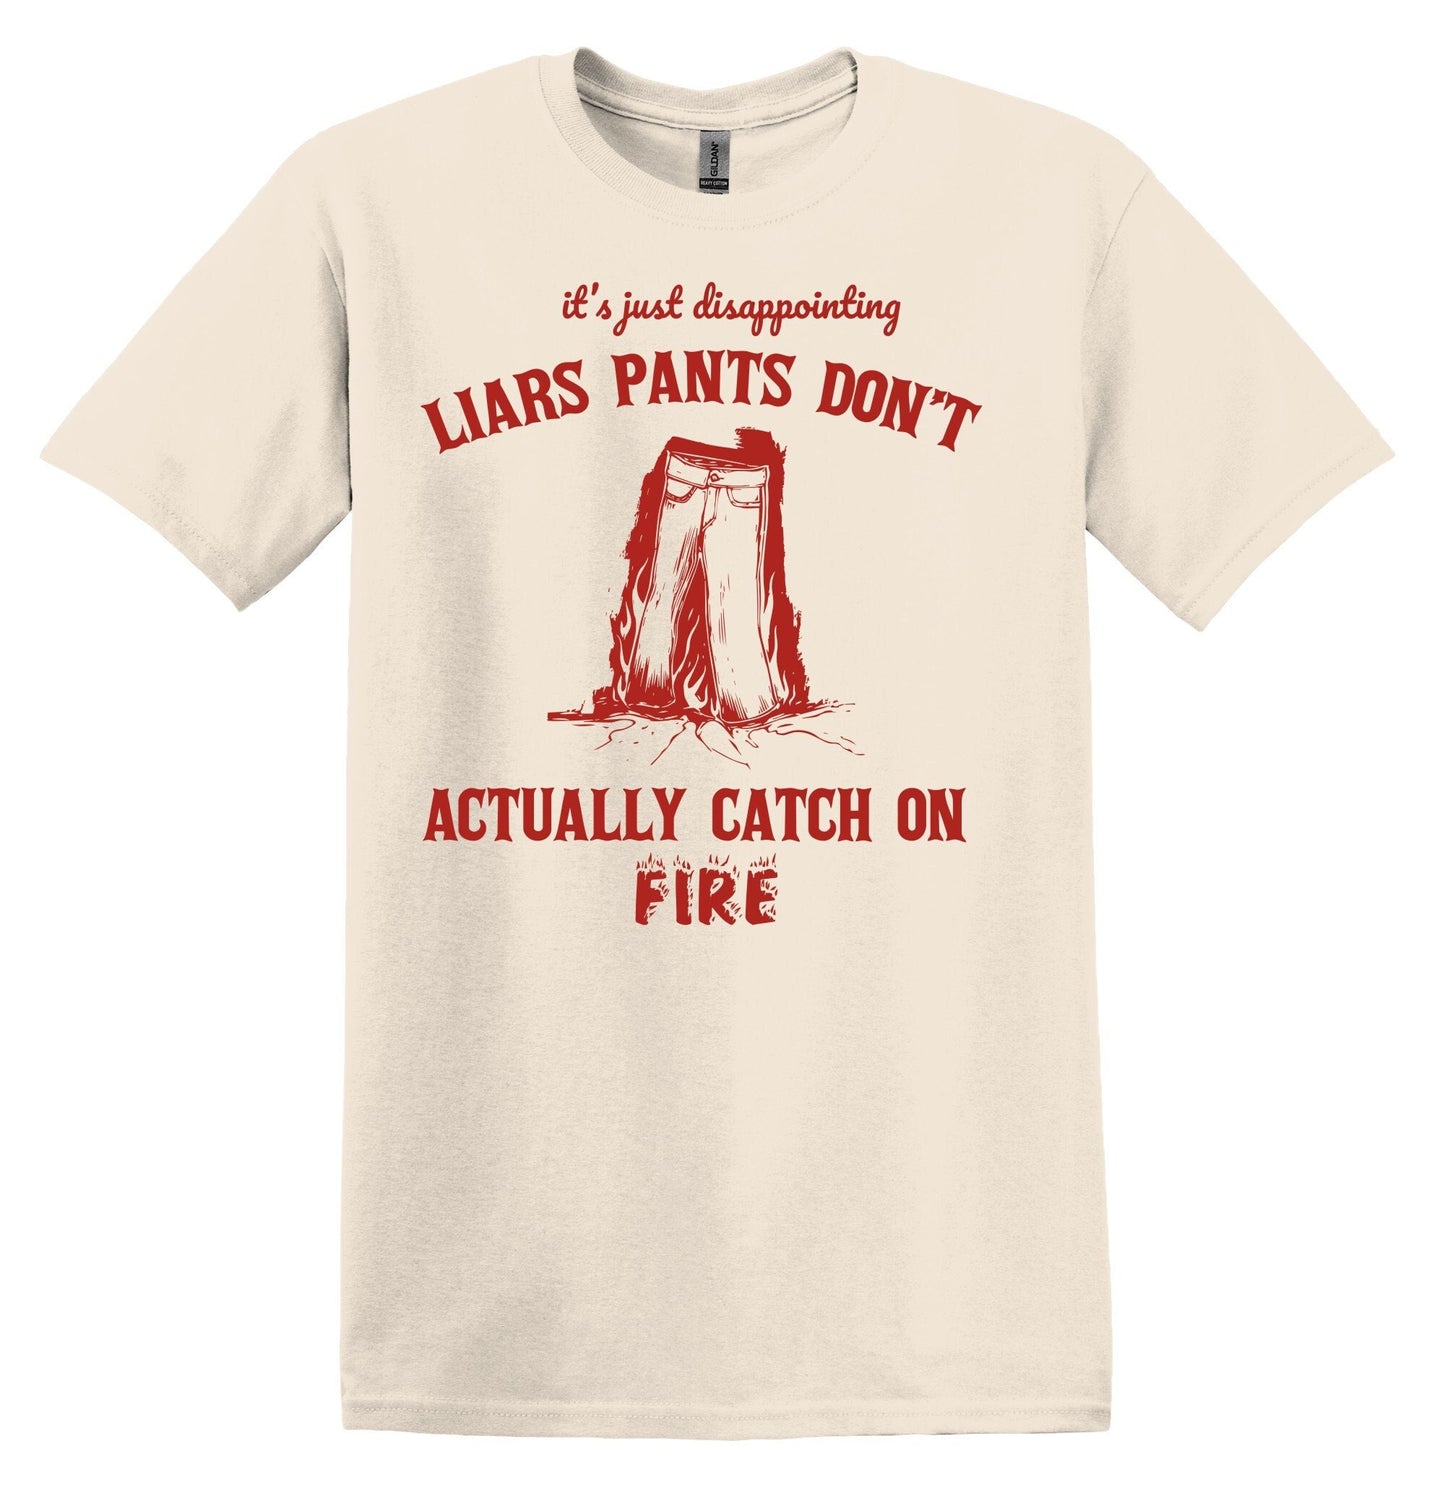 It's Just Disappointing Liars Pants Don't Actually Catch on Fire Shirt Graphic Shirt Funny Shirts Vintage Funny T Shirt Minimalist Shirt